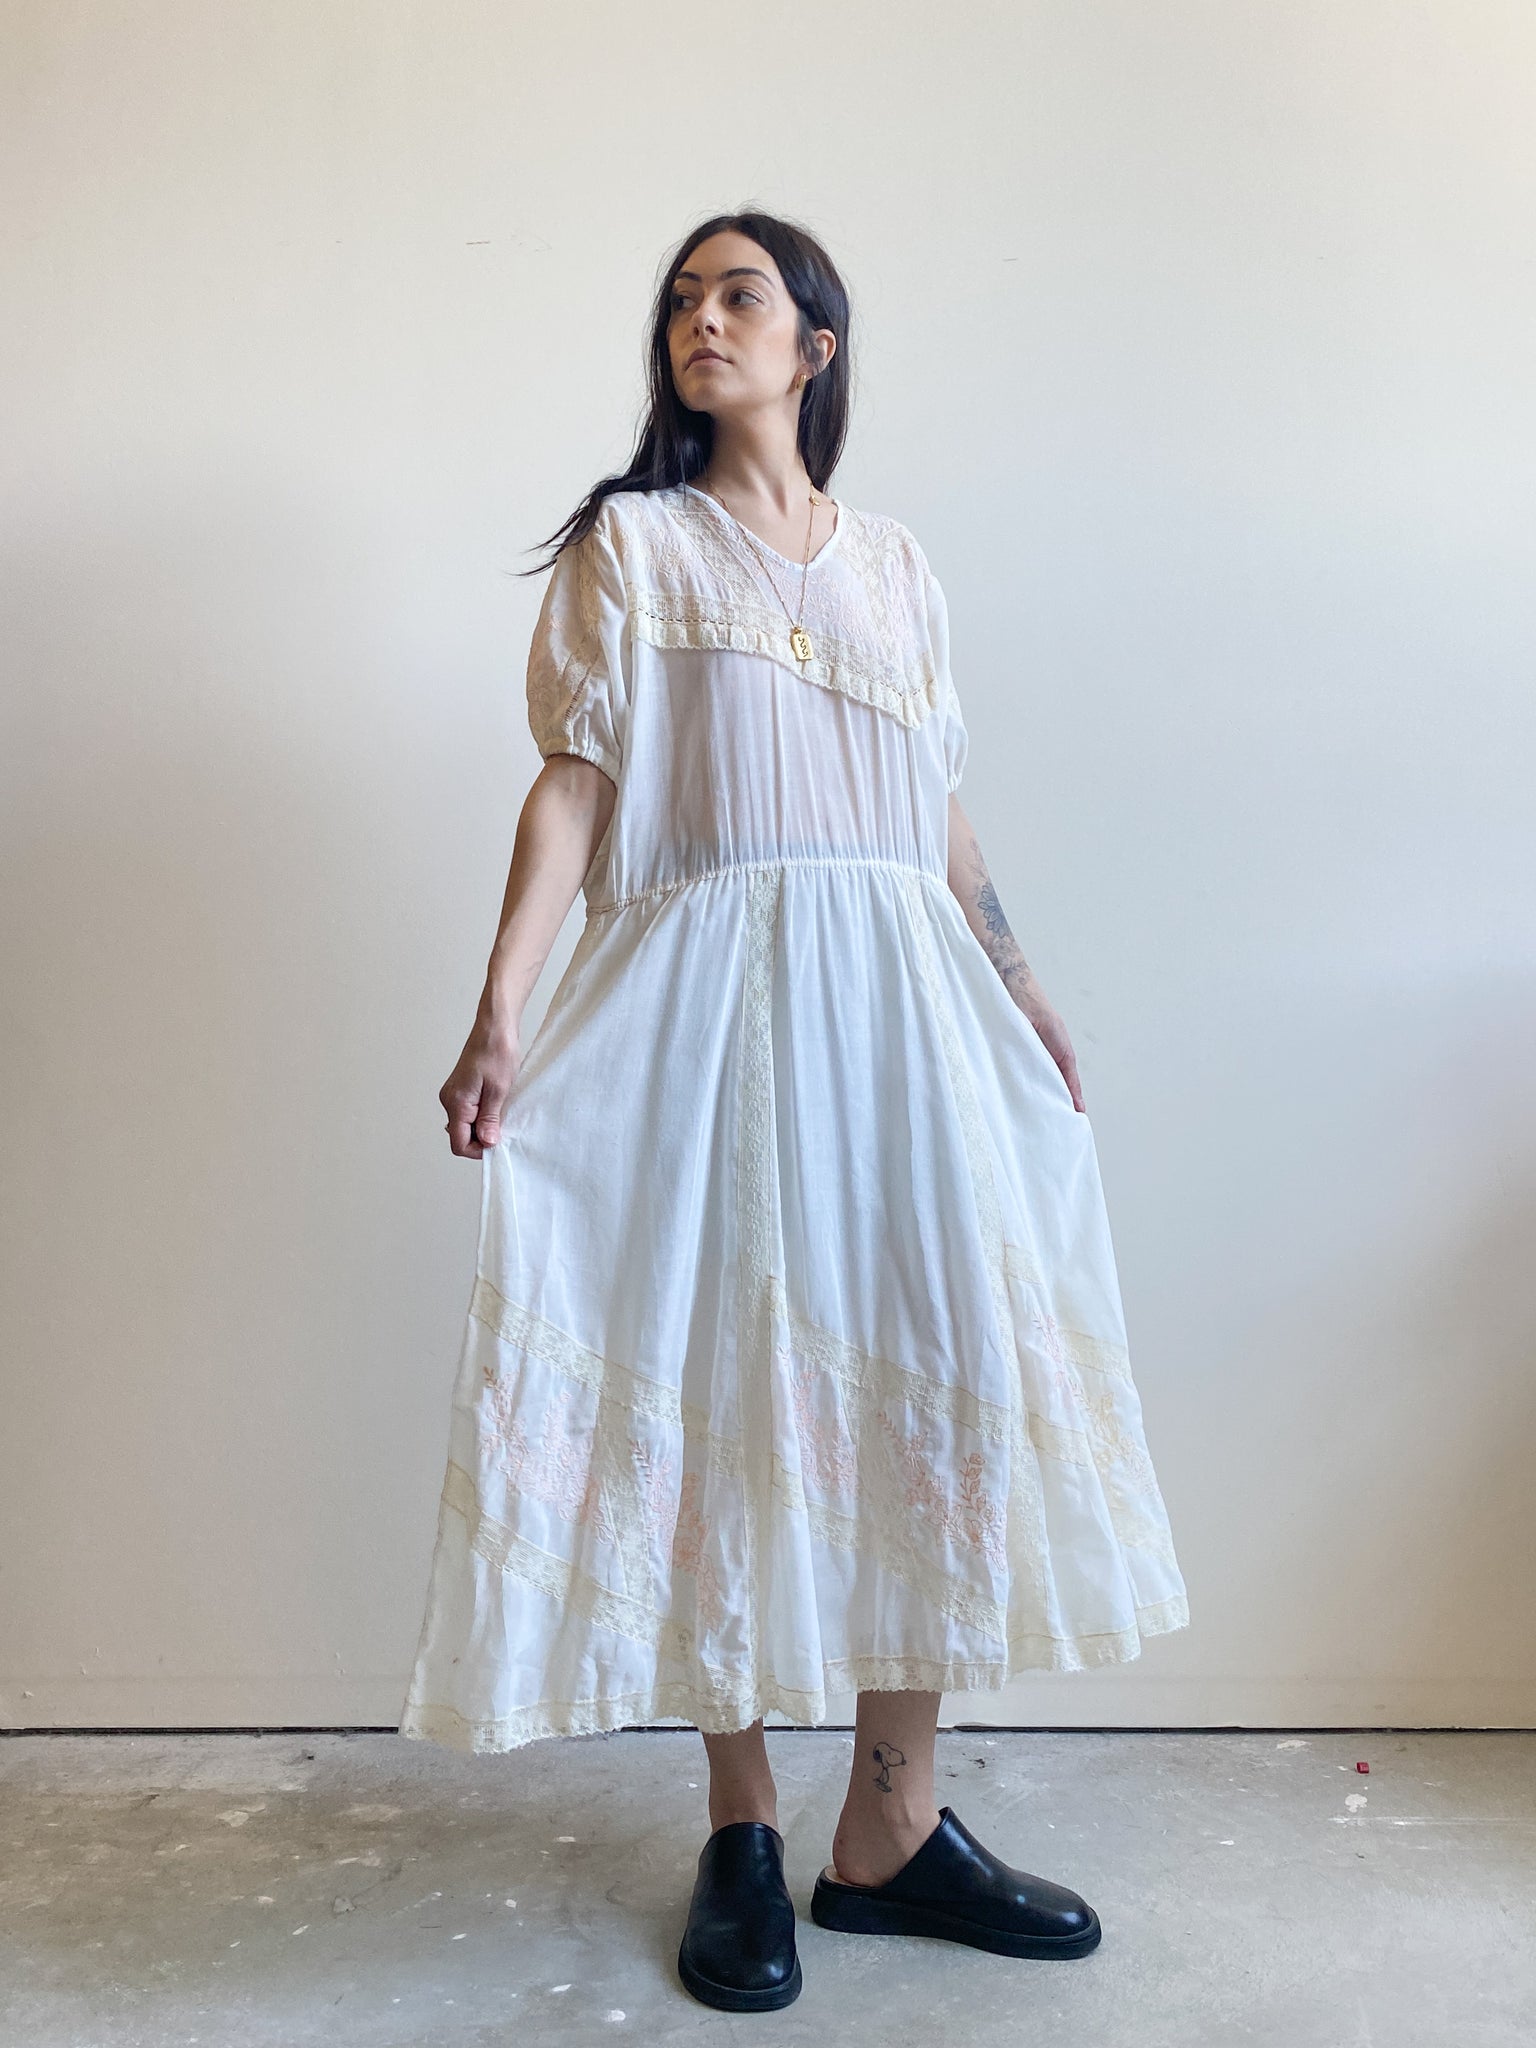 White Sheer Vintage Peasant Dress with Lace (XL/XXL)